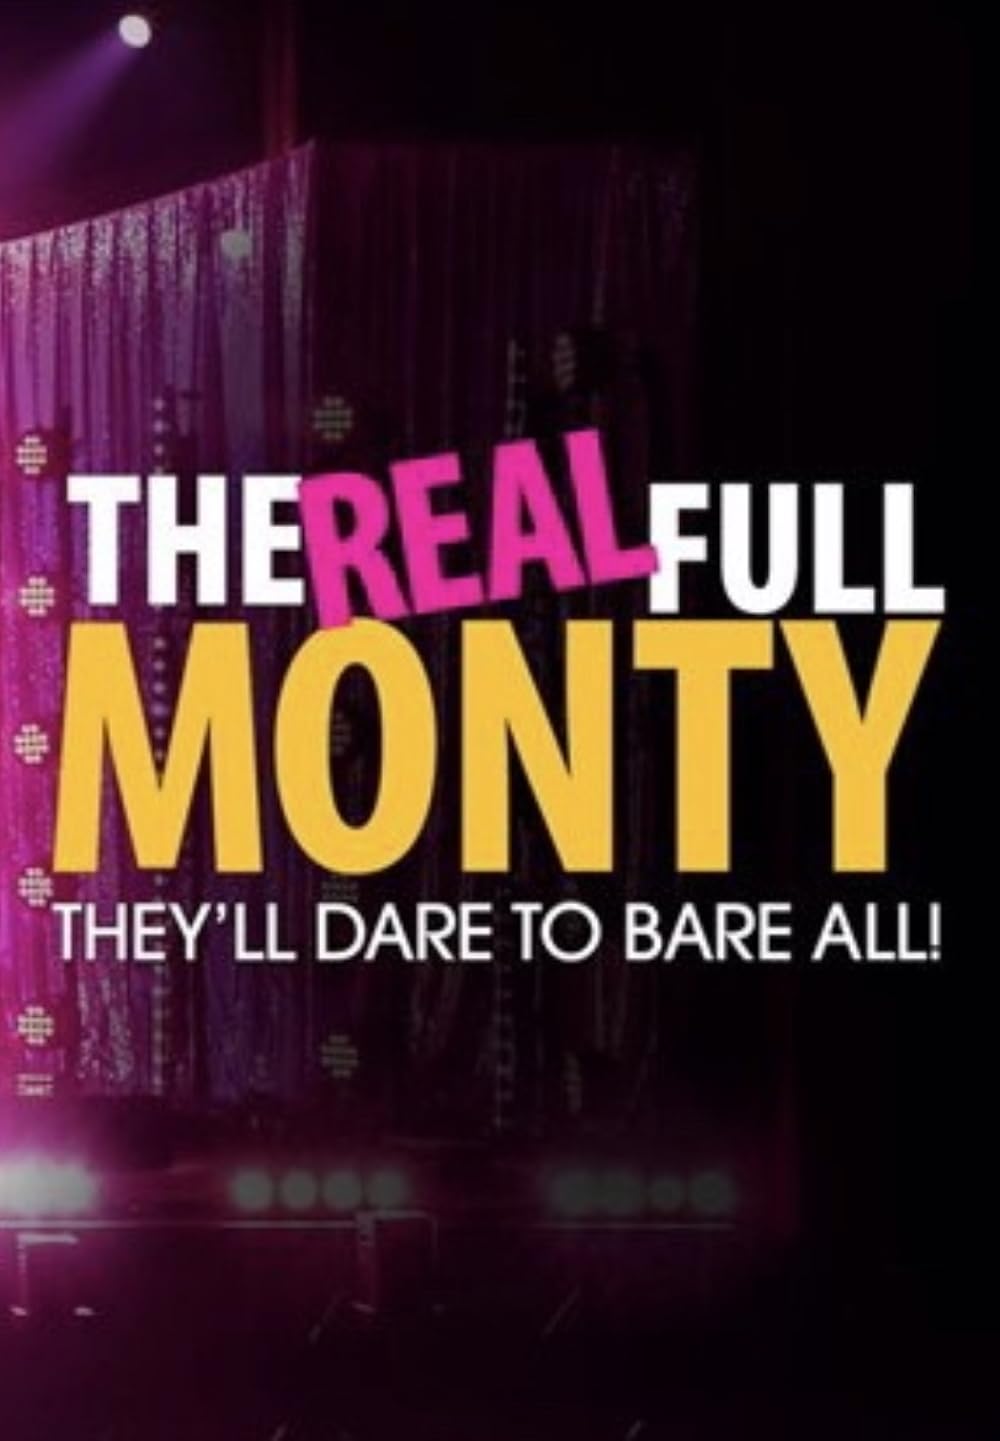 The Real Full Monty